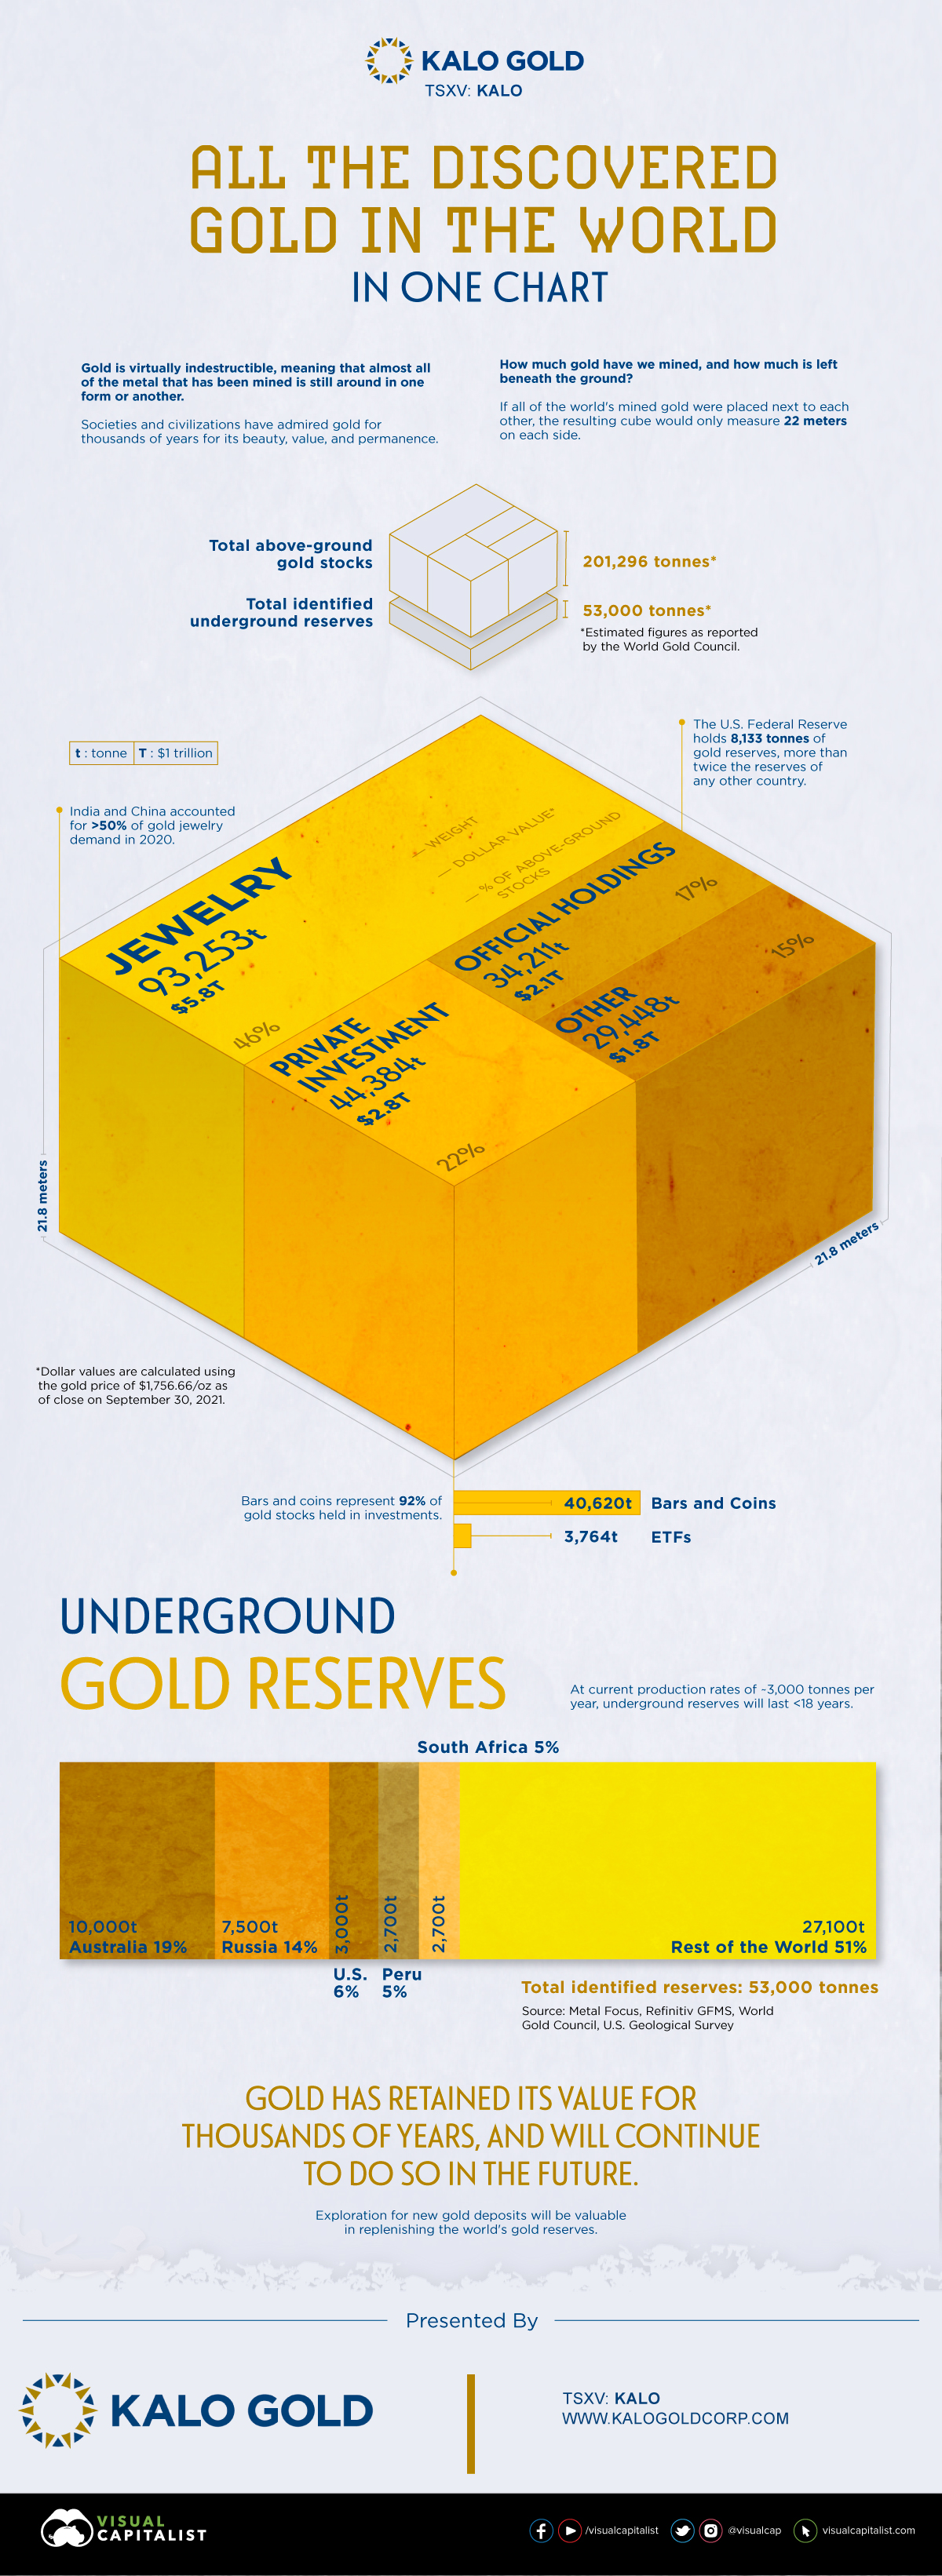 https://www.visualcapitalist.com/wp-content/uploads/2021/11/how-much-gold-is-in-the-world.jpg